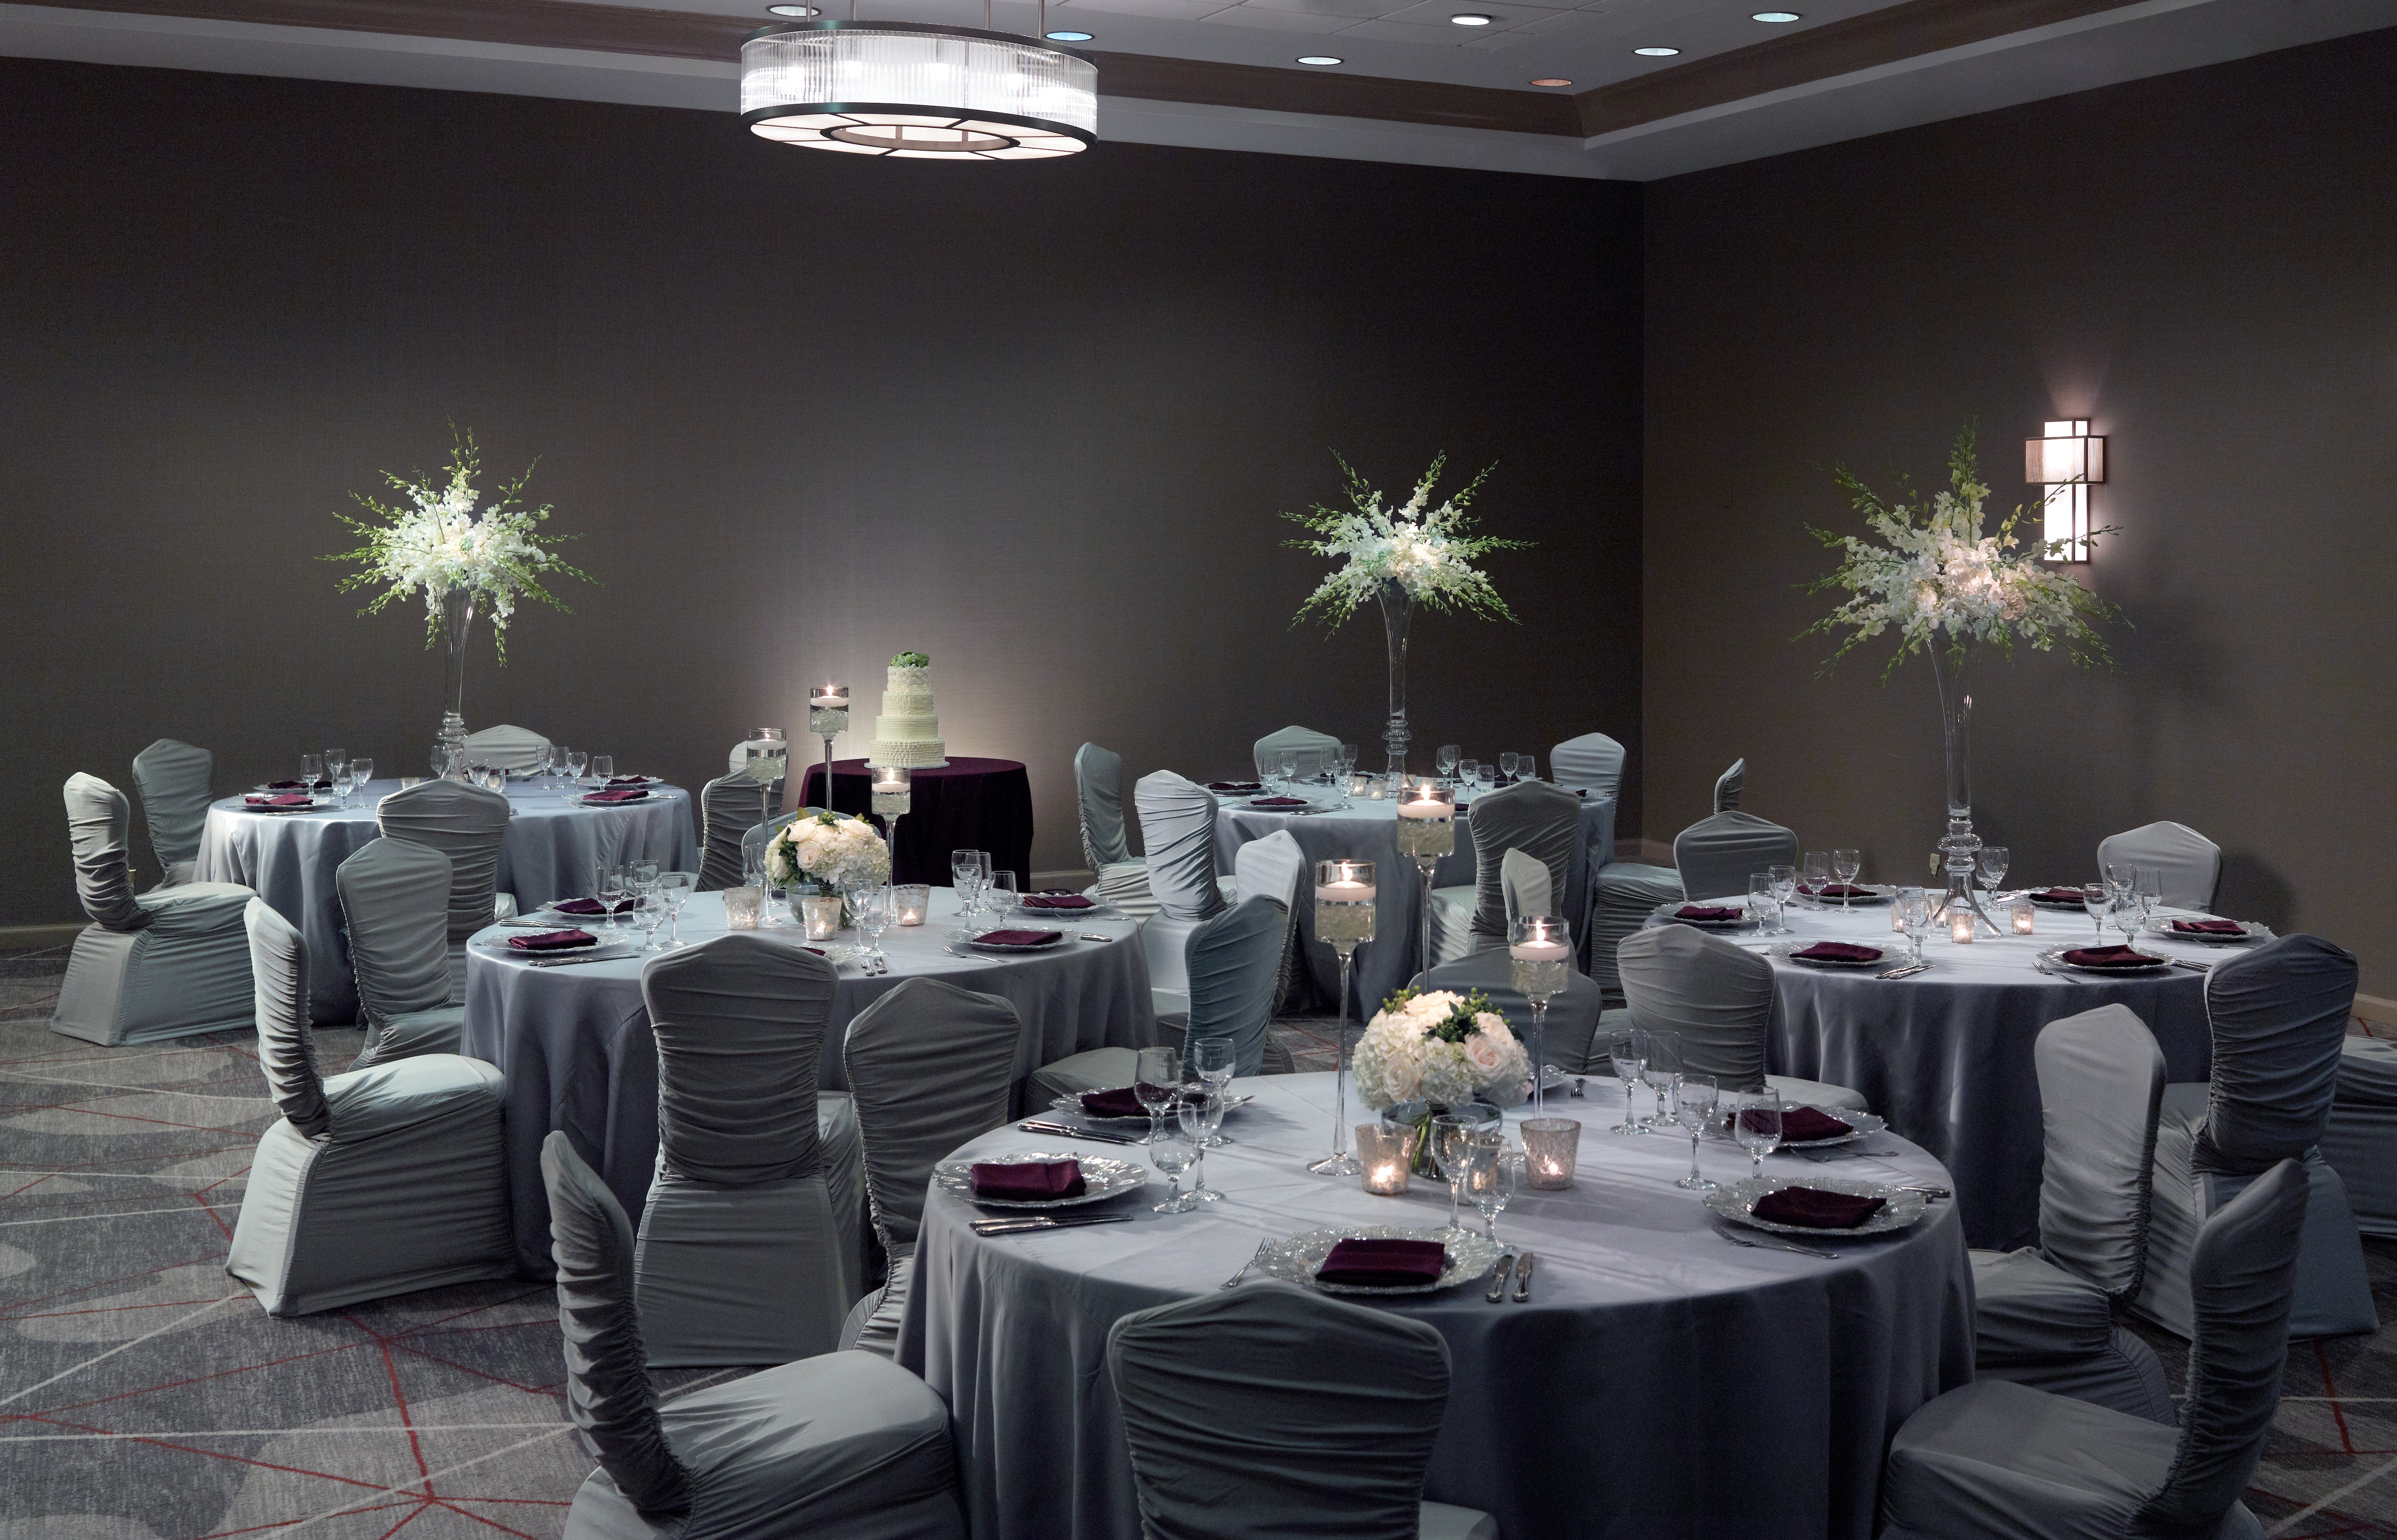 Our well-appointed Ballroom accommodates up to 240 guests for a for a seated banquet.